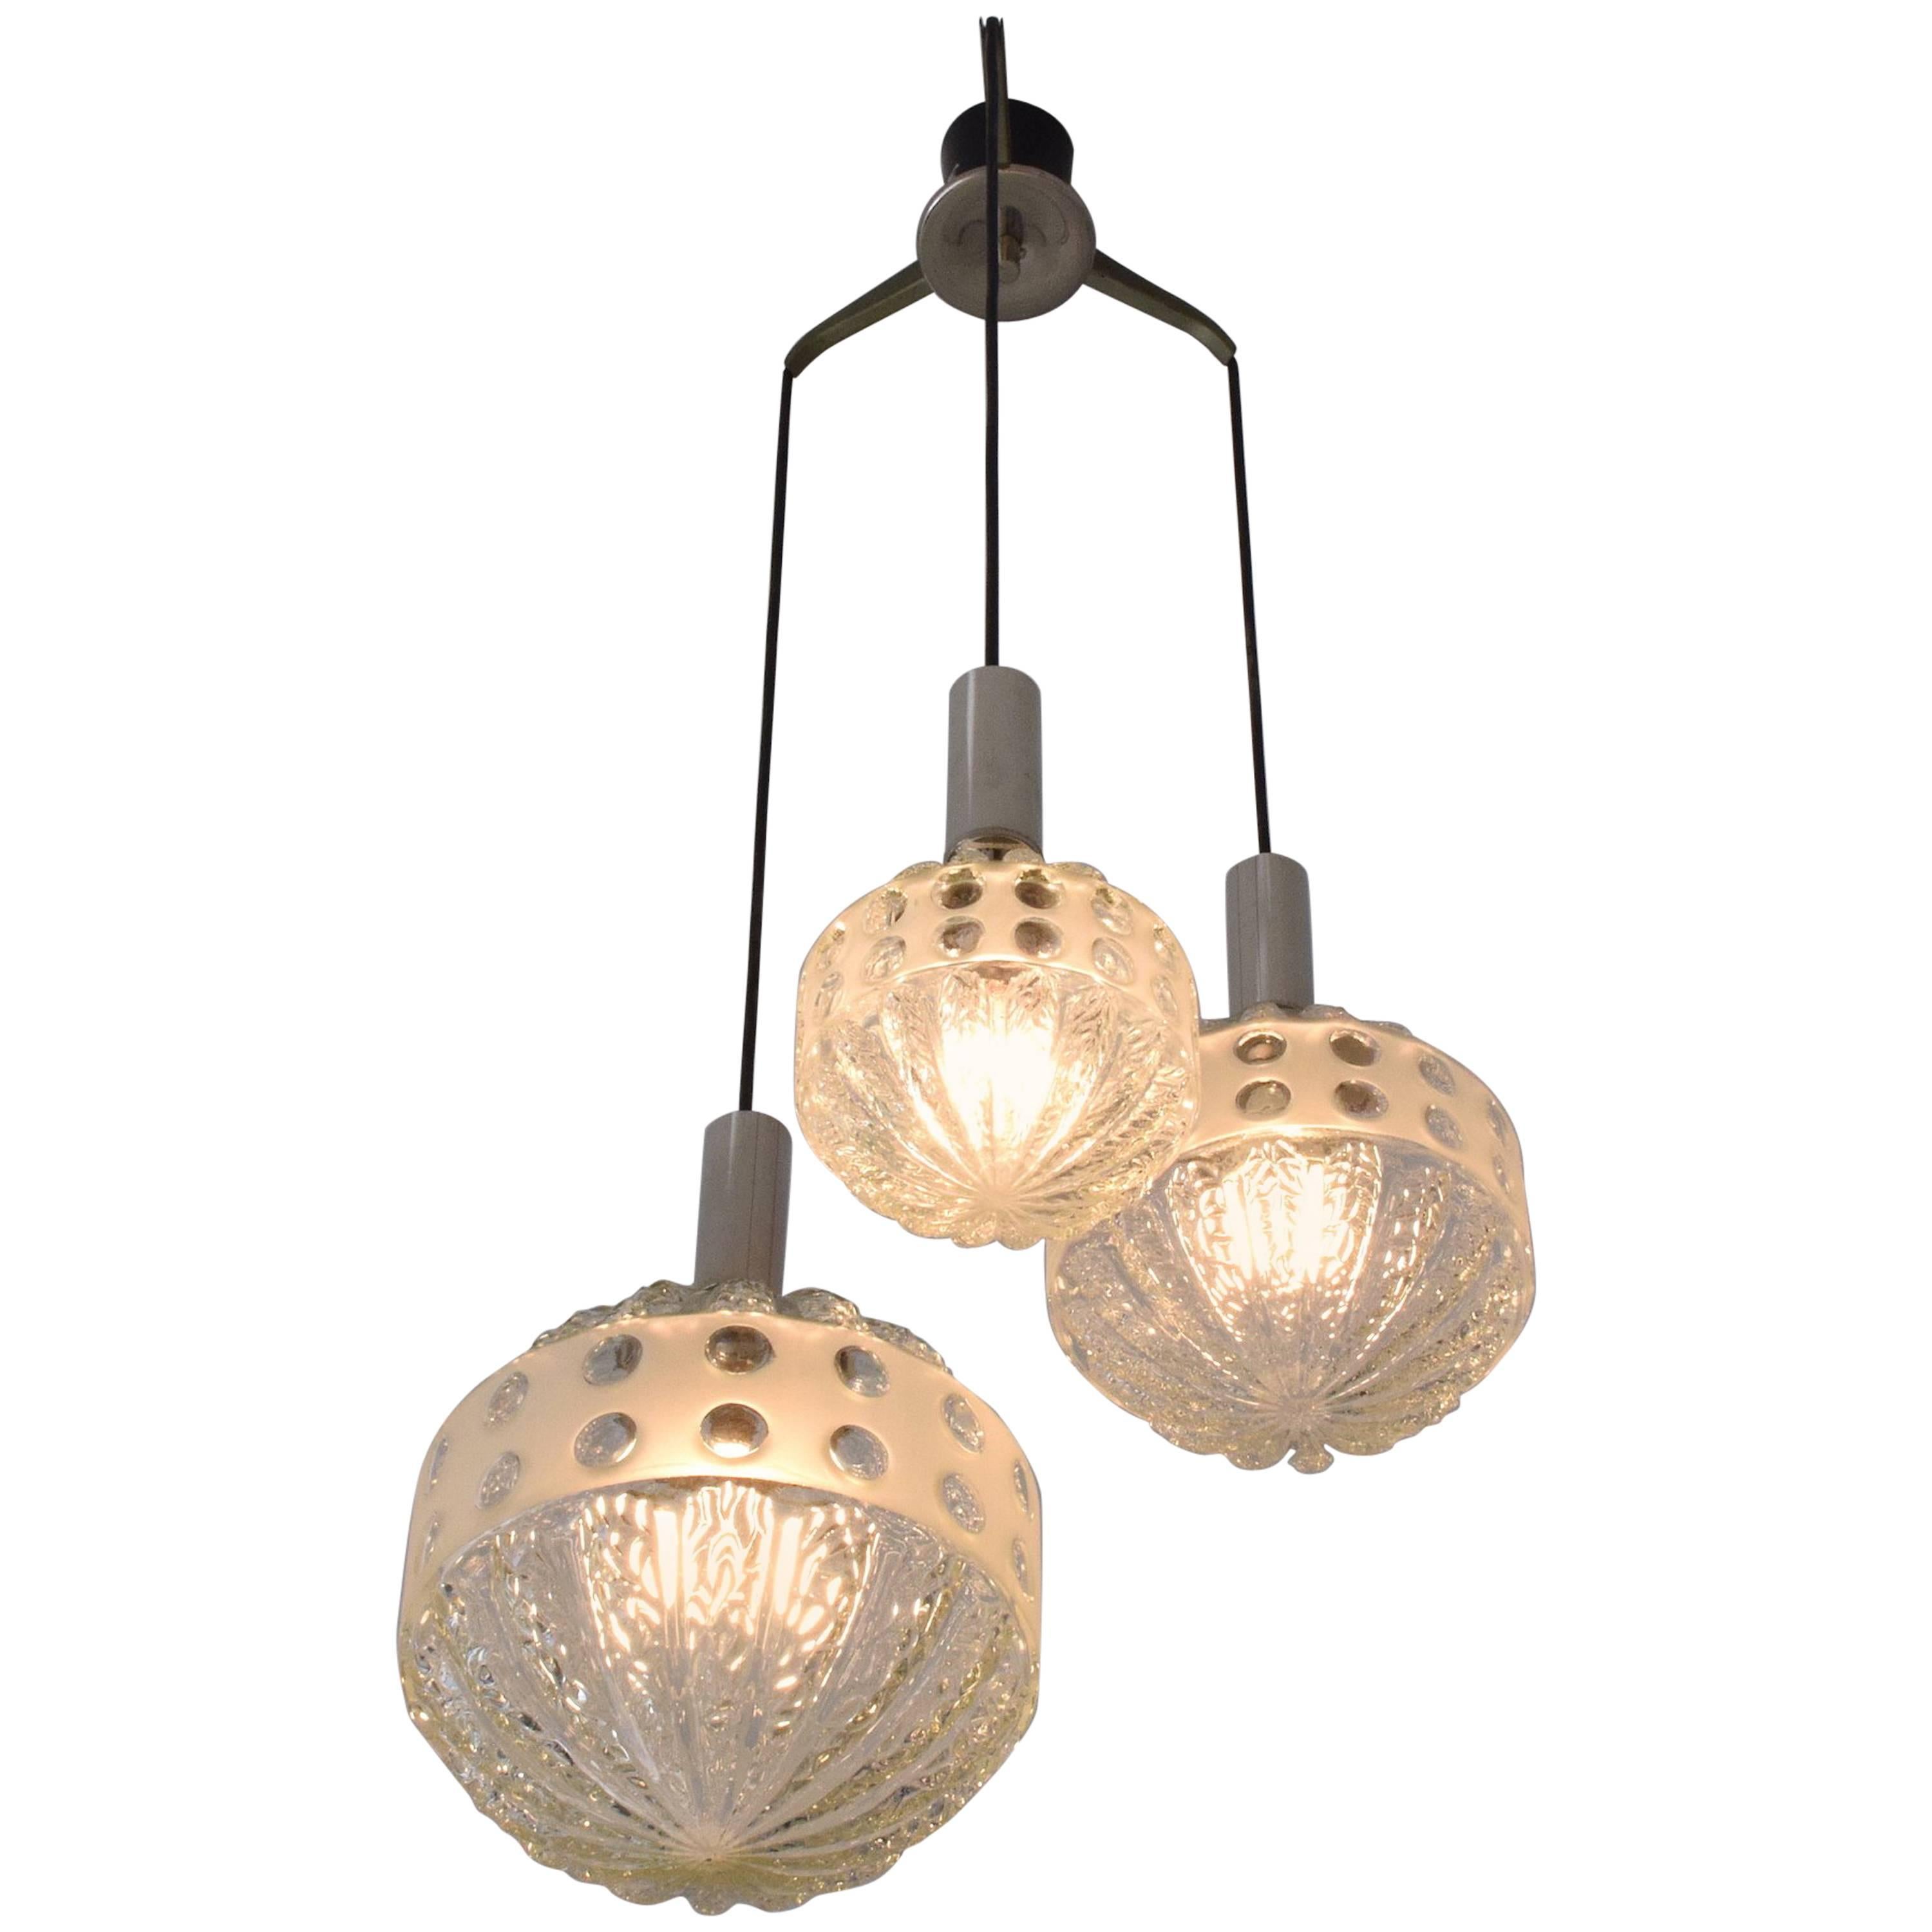 A 20th century French vintage pendant light or chandelier in Cascade style designed with three textured glass globes of various sizes and mounted on a chrome structure.
France, circa 1970s.